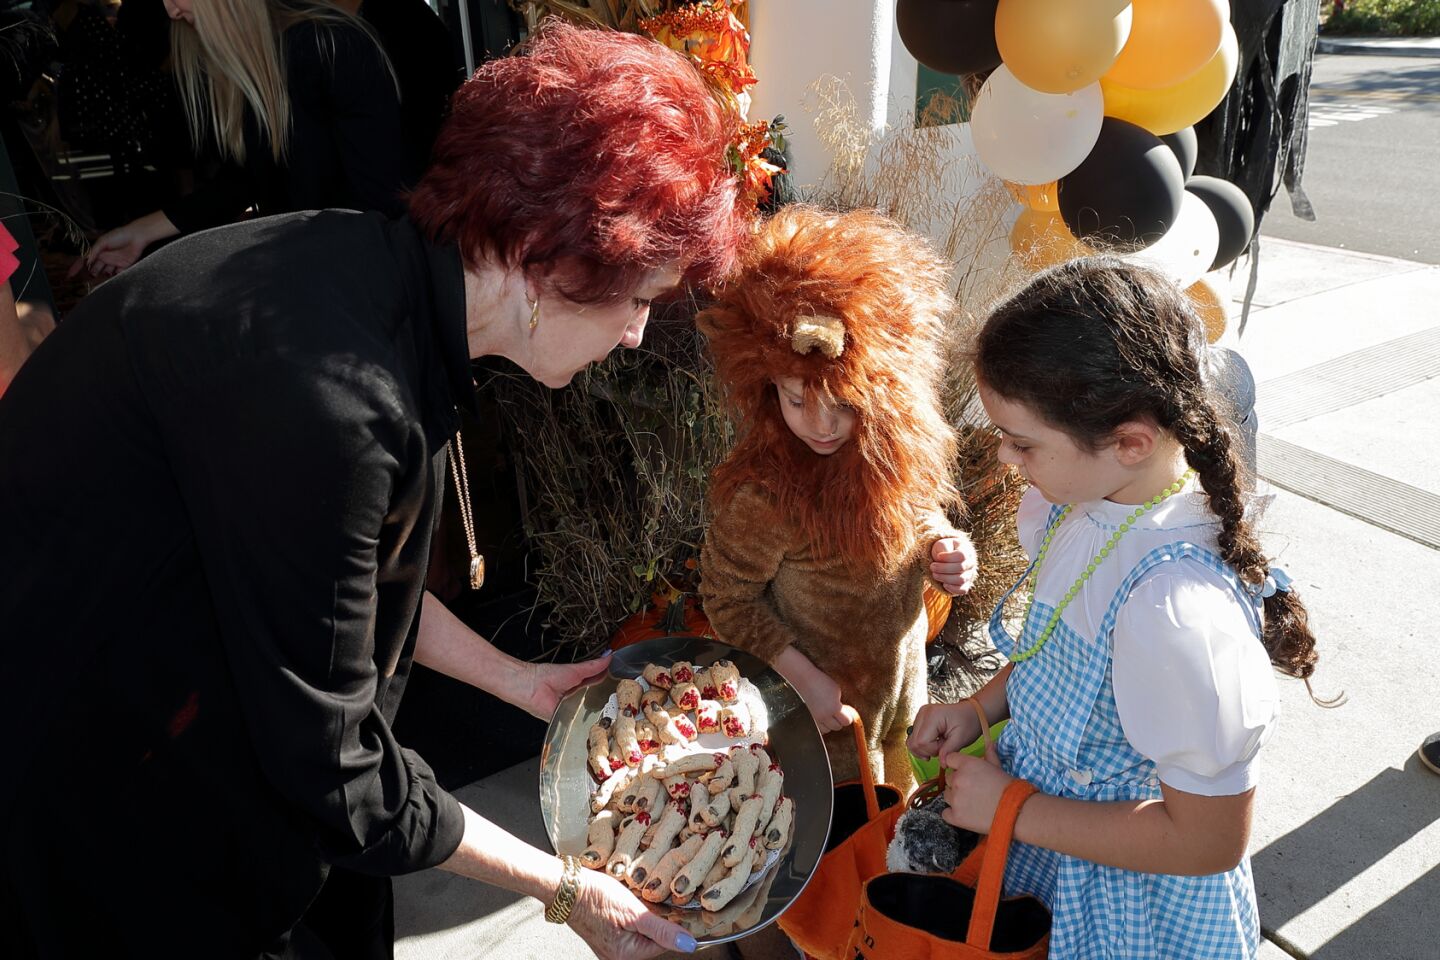 Rebecca Negard of Pacific Sotheby's hands out candy to Jack and Kristen Dixon